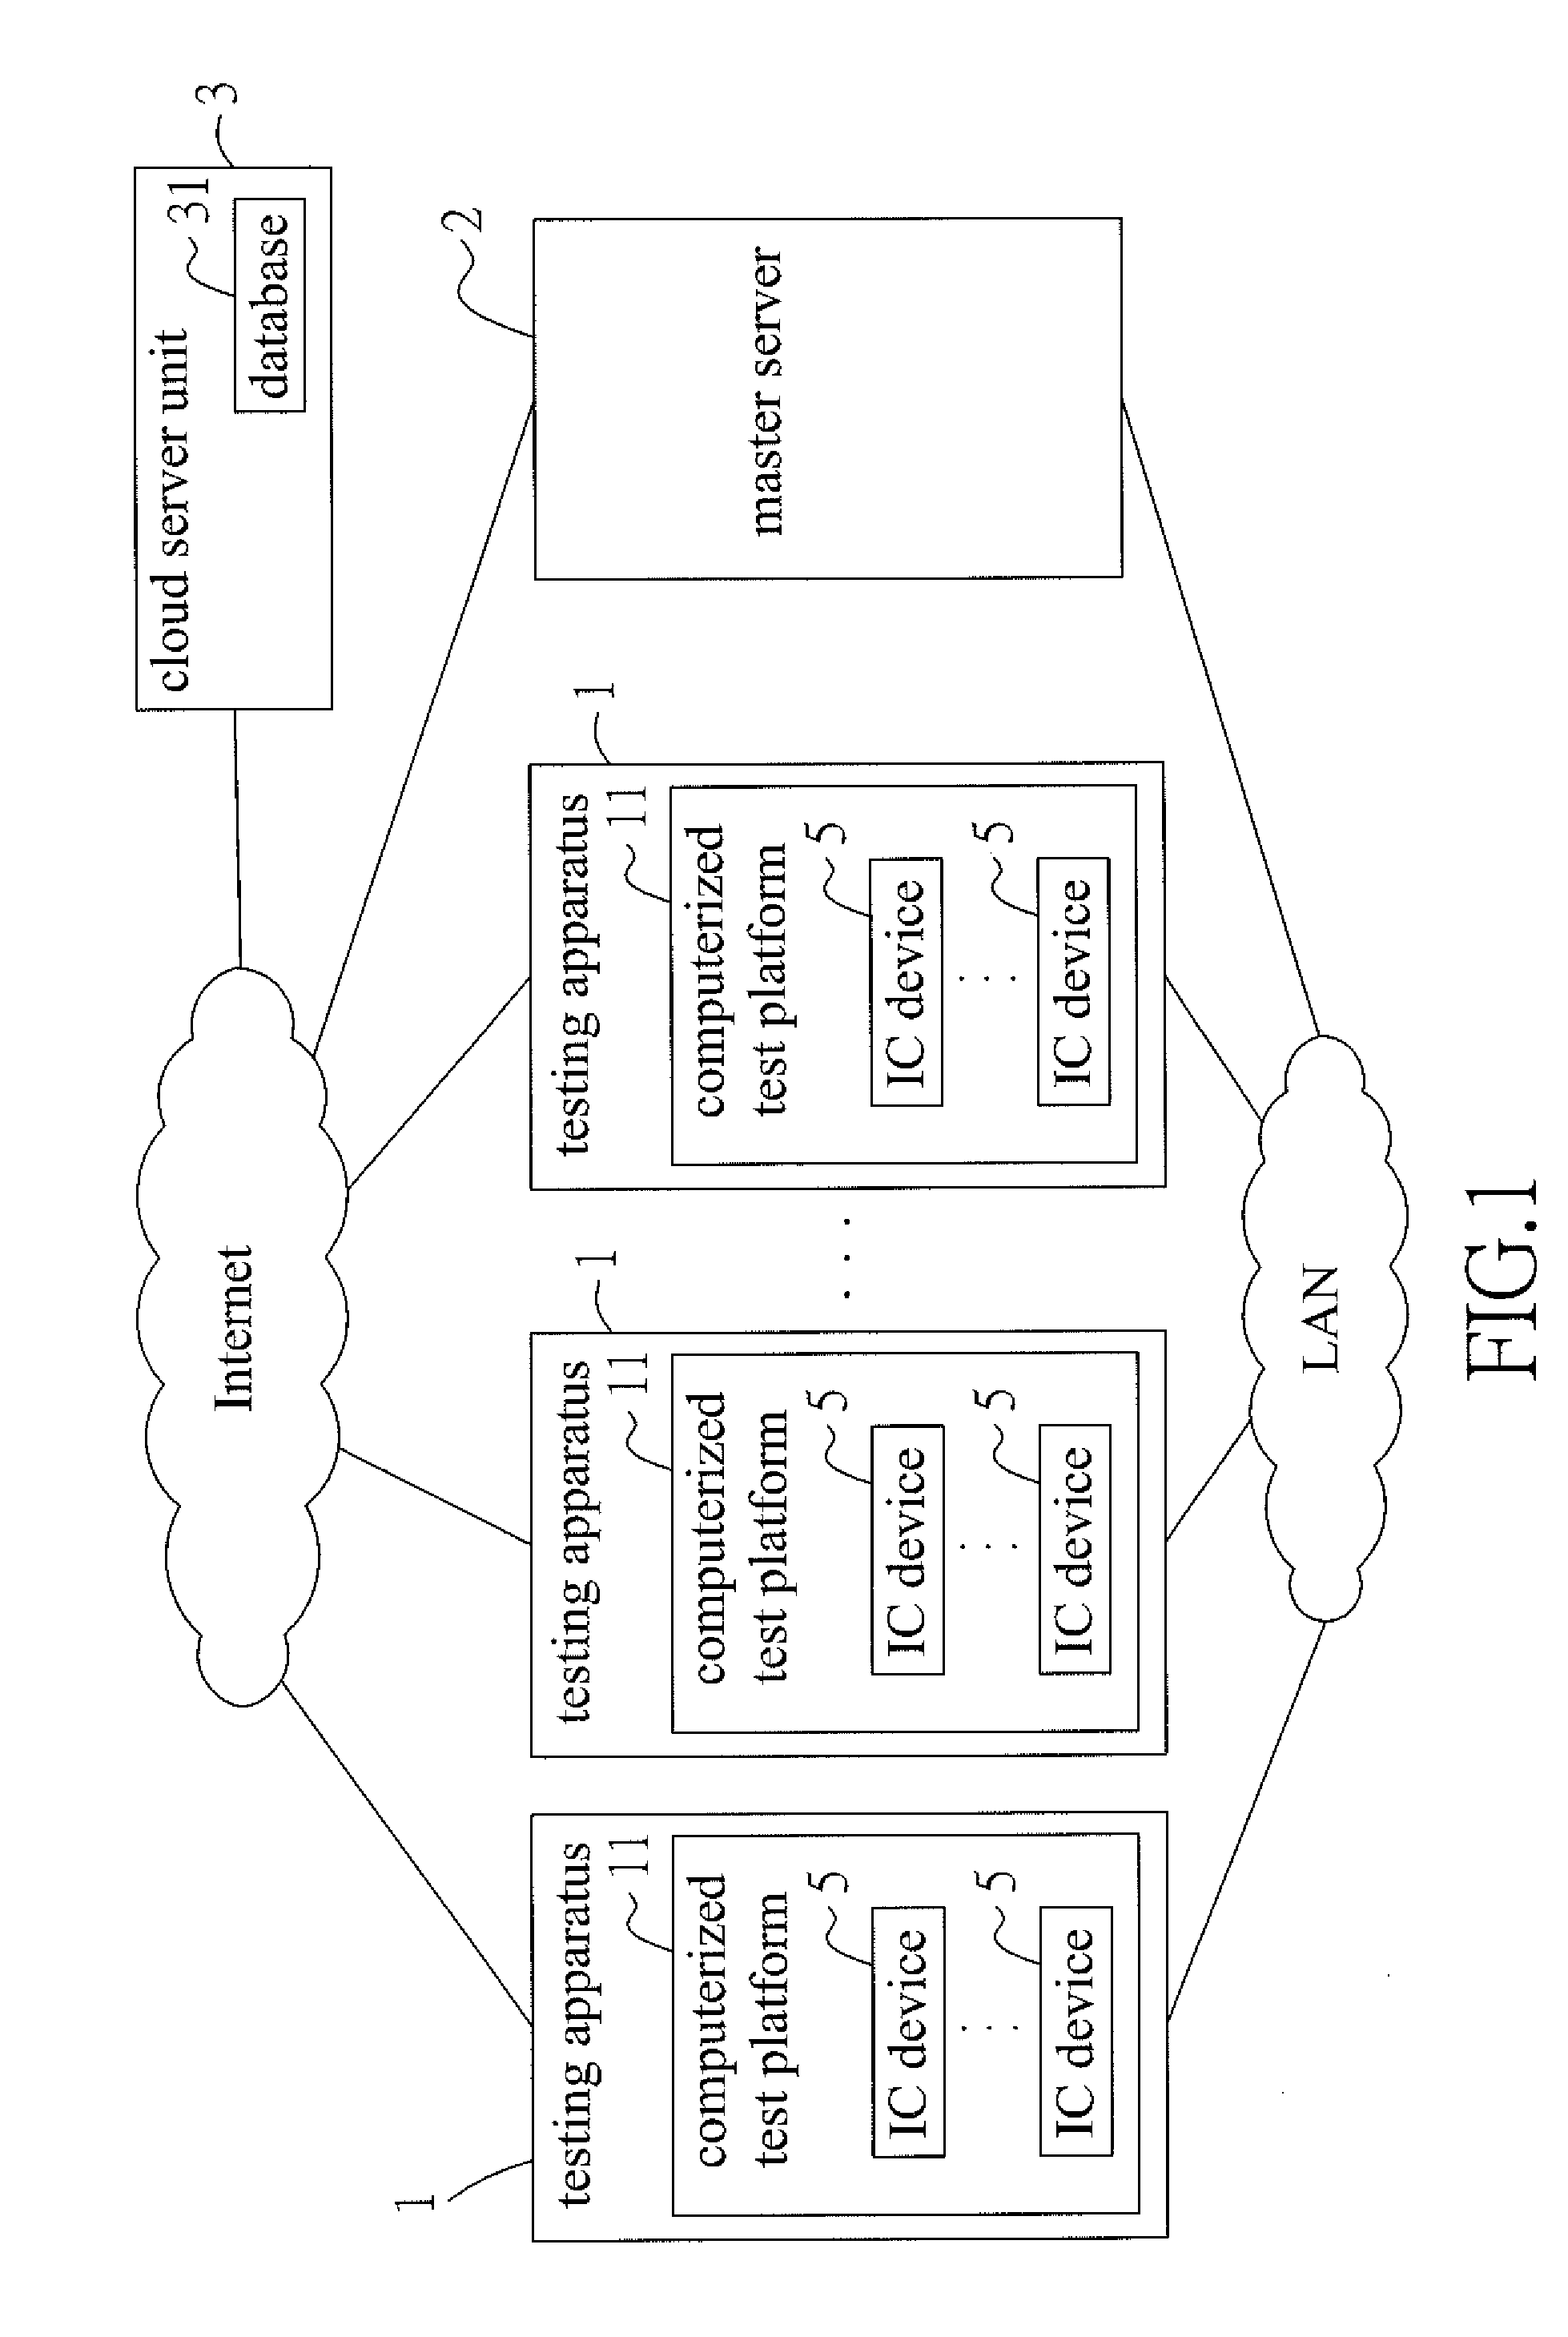 System and method for cloud testing and remote monitoring of integrated circuit devices